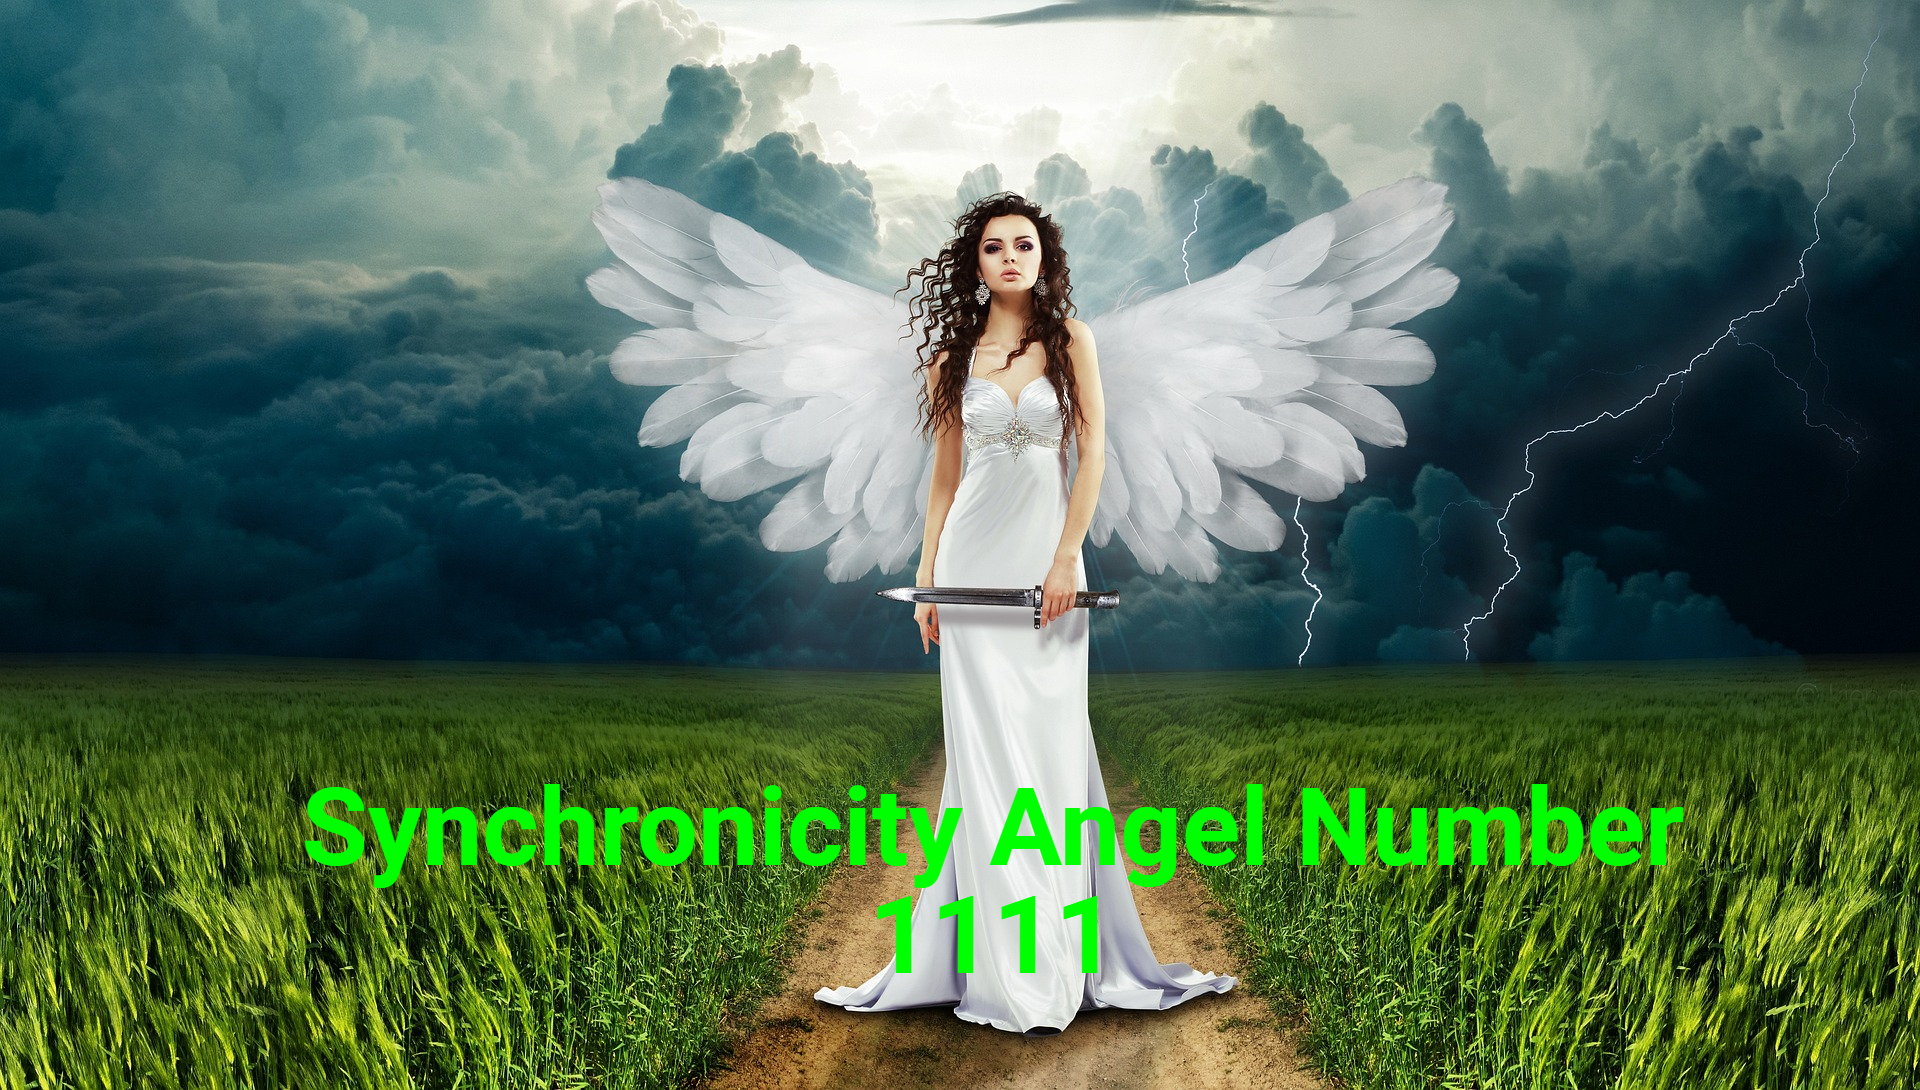 What Is Synchronicity Angel Number 1111 And Why Is It Important?